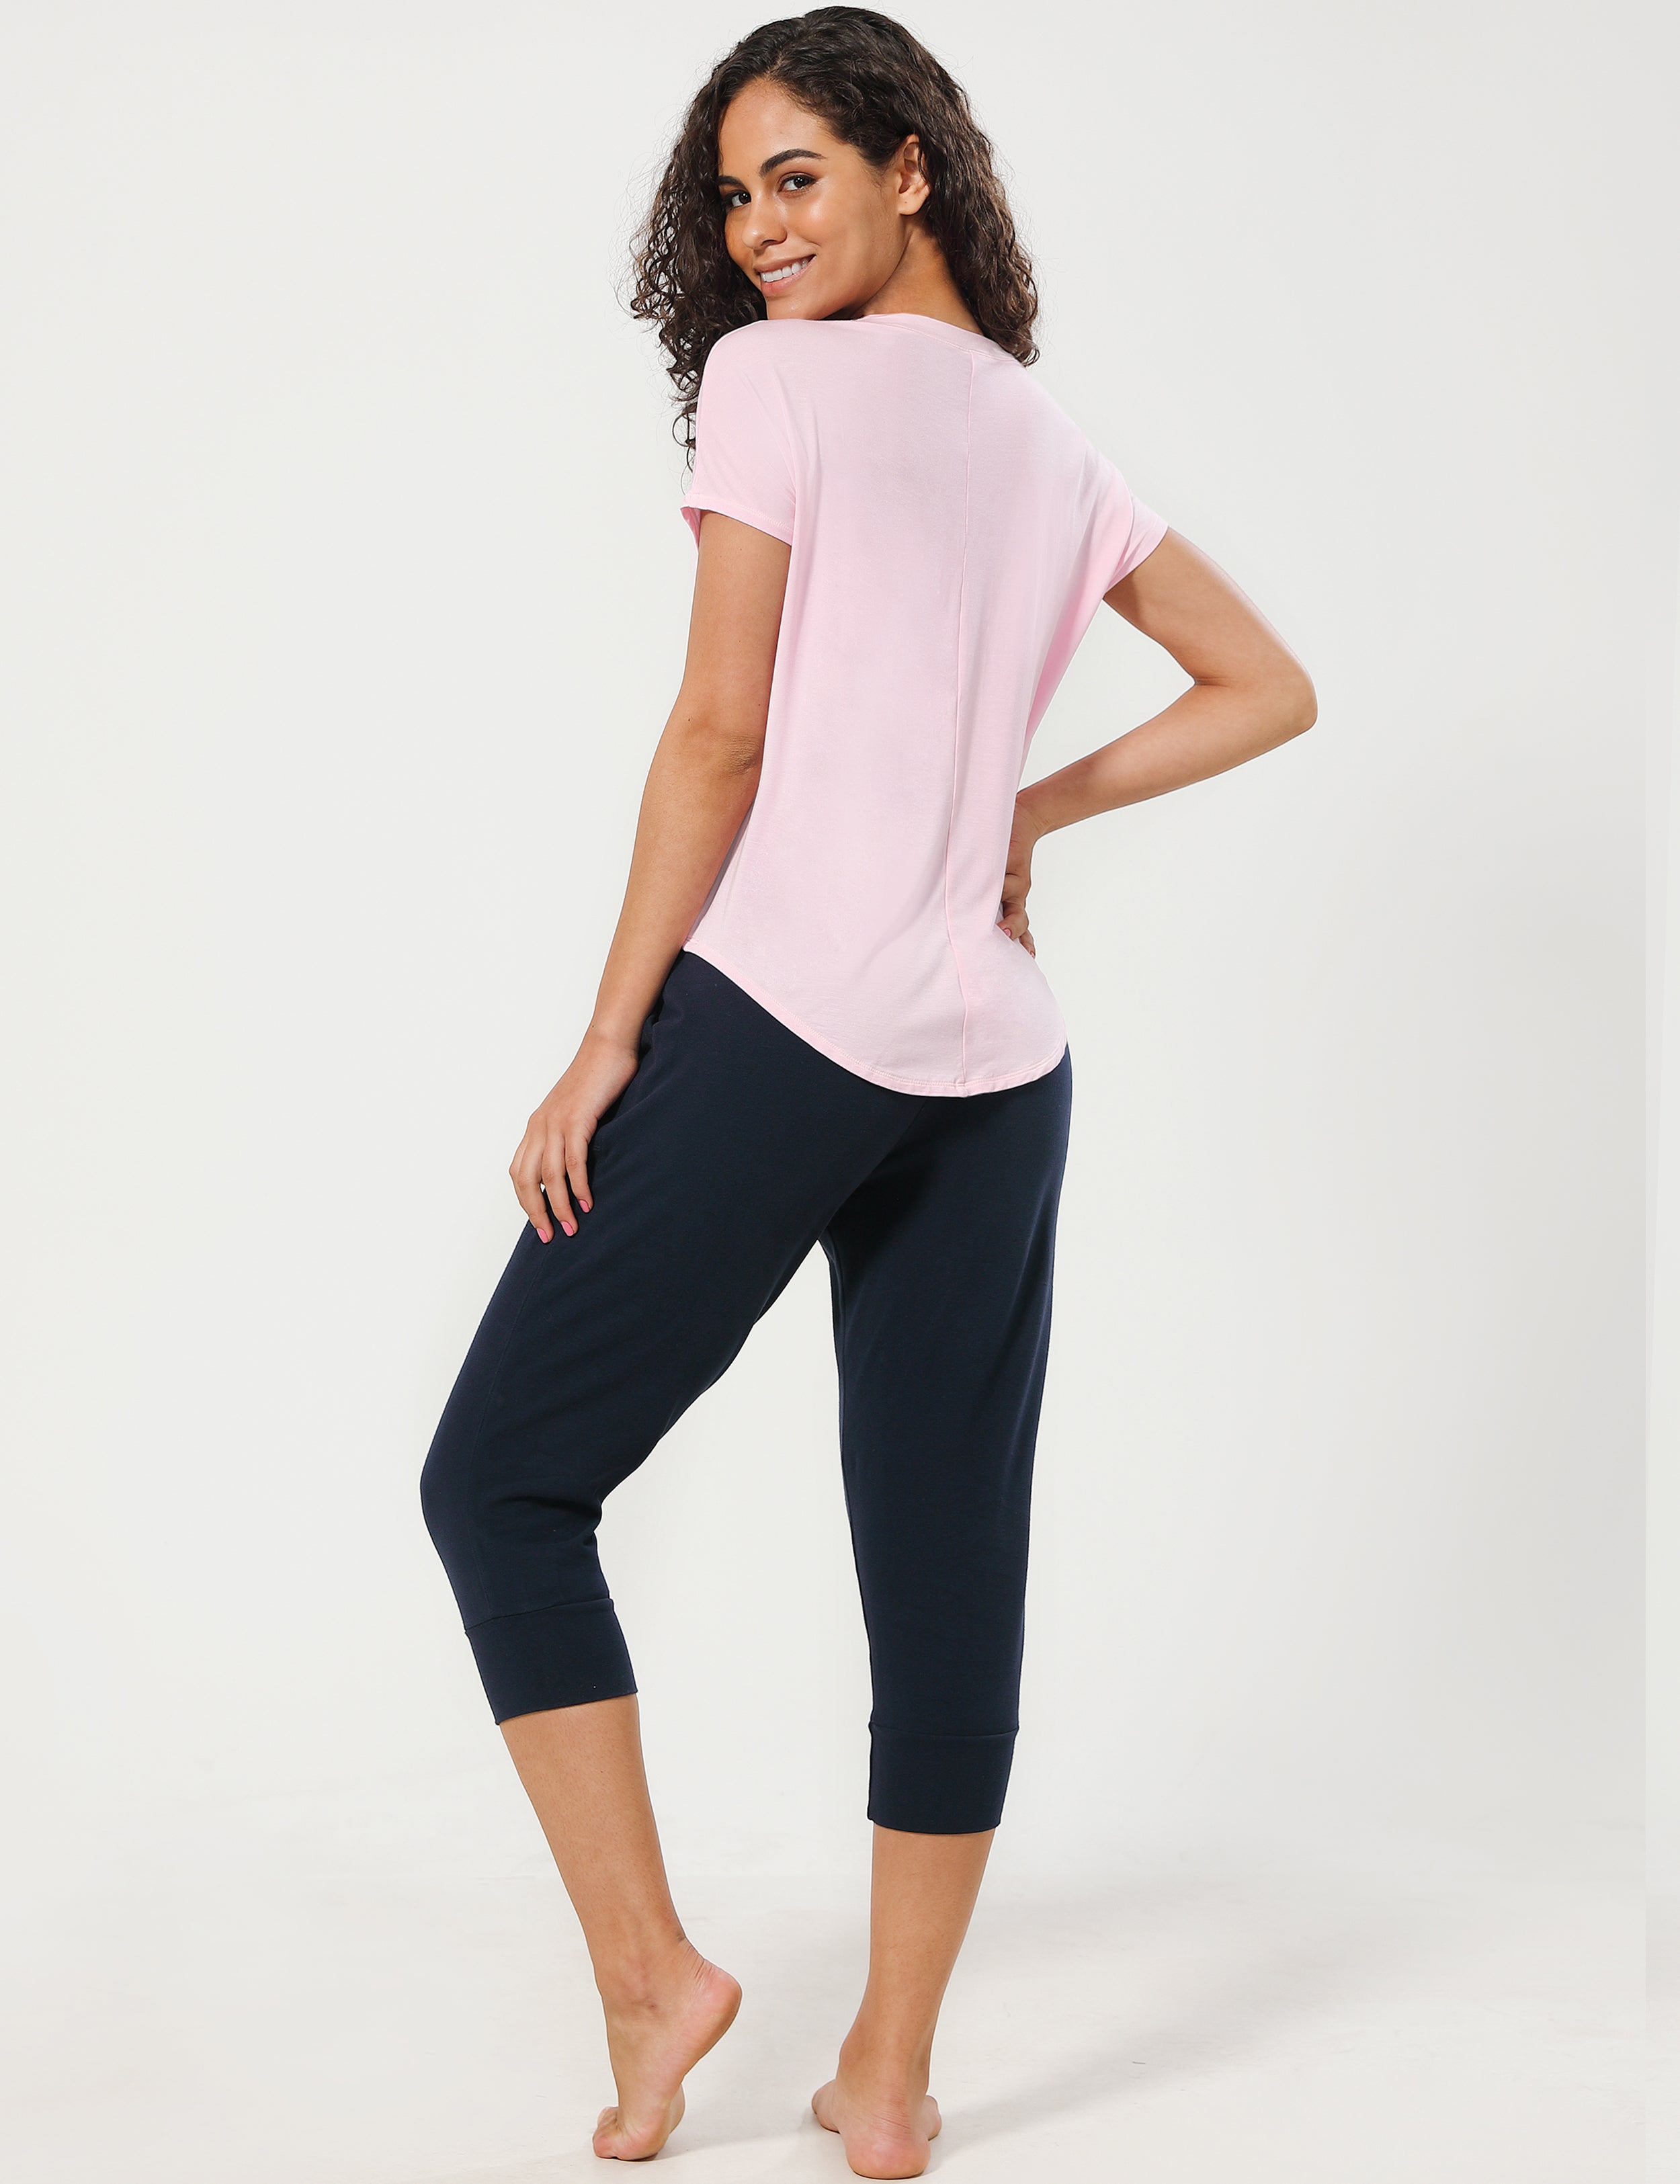 Hip Length Short Sleeve Shirt lightpink 93%Modal/7%Spandex Designed for Pilates Classic Fit, Hip Length An easy fit that floats away from your body Sits below the waistband for moderate, everyday coverage Lightweight, elastic, strong fabric for moisture absorption and perspiration, sports and fitness clothing.